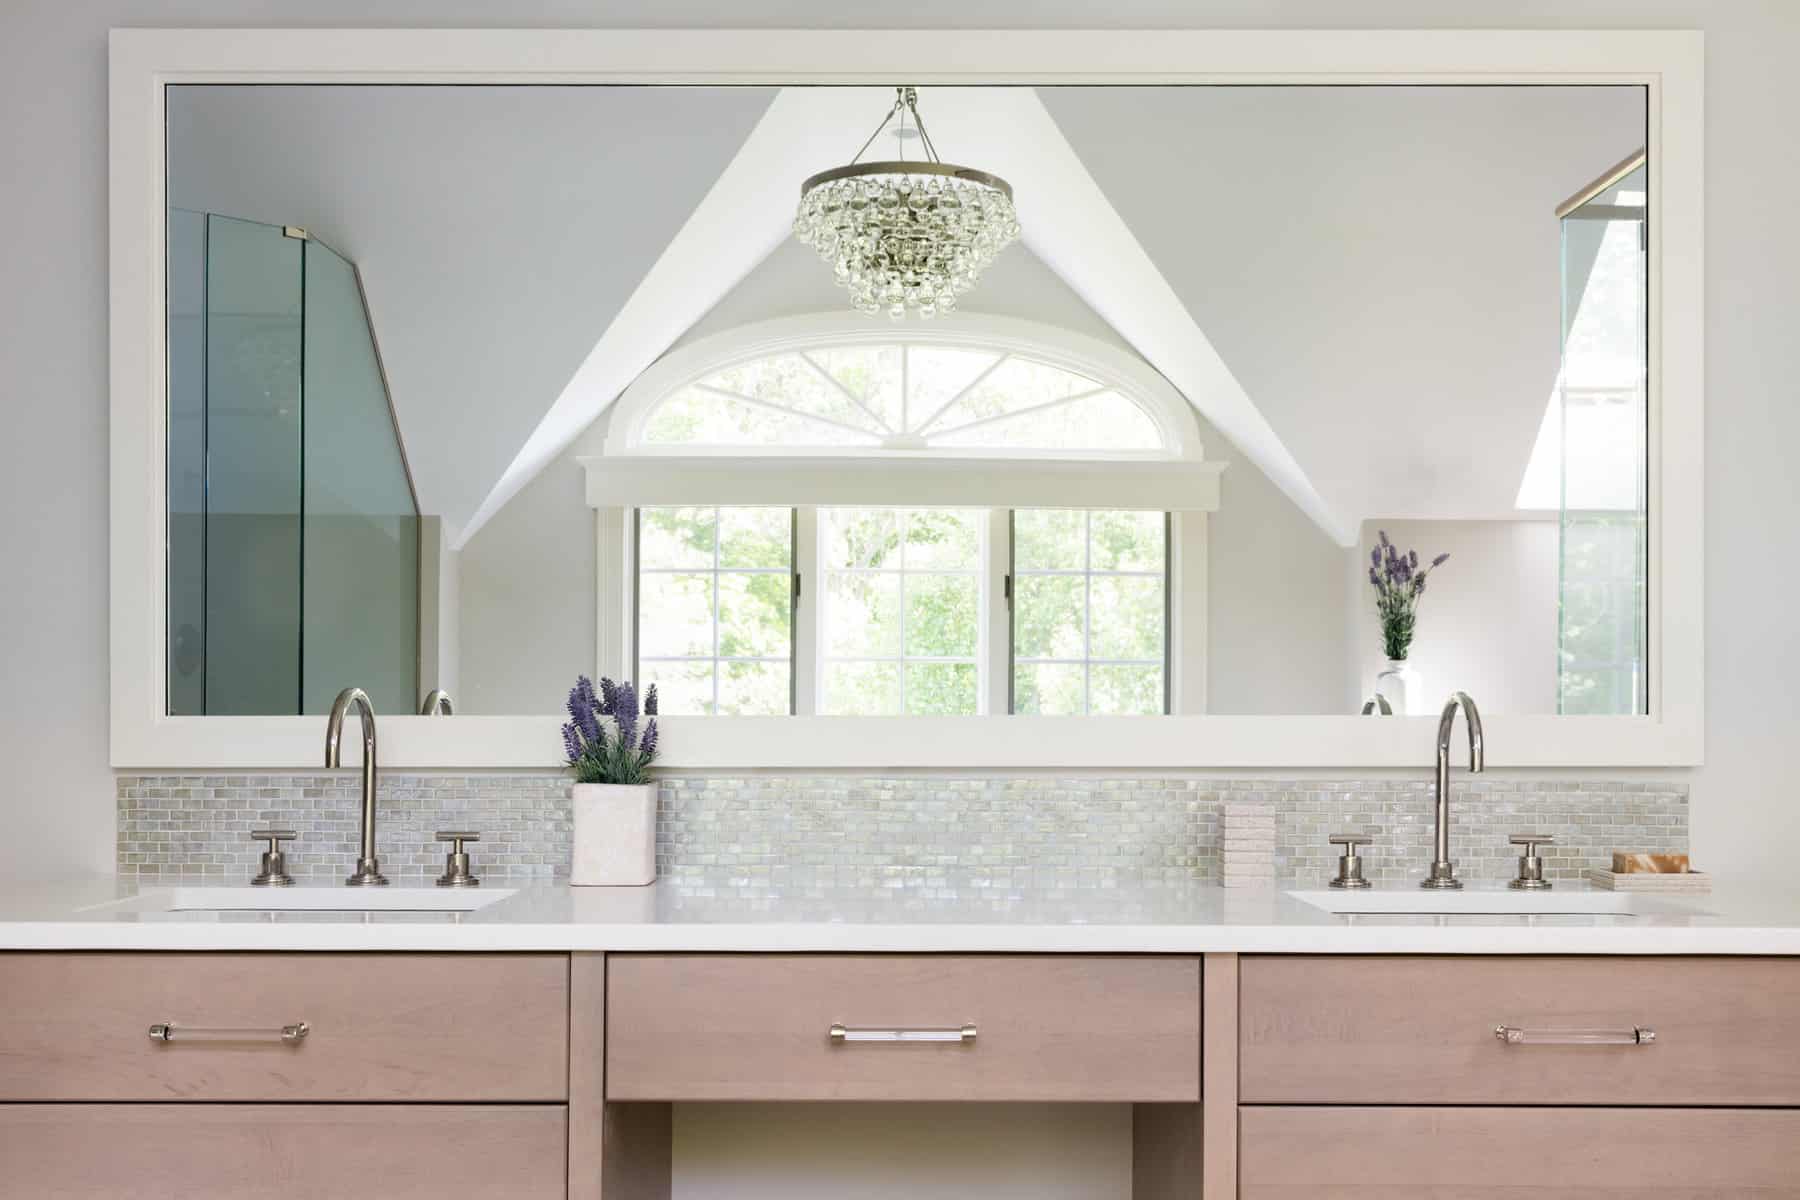 RELAXING RETREAT MASTER BATH--The large double vanity features Lacava undermount sinks, with a center makeup counter.